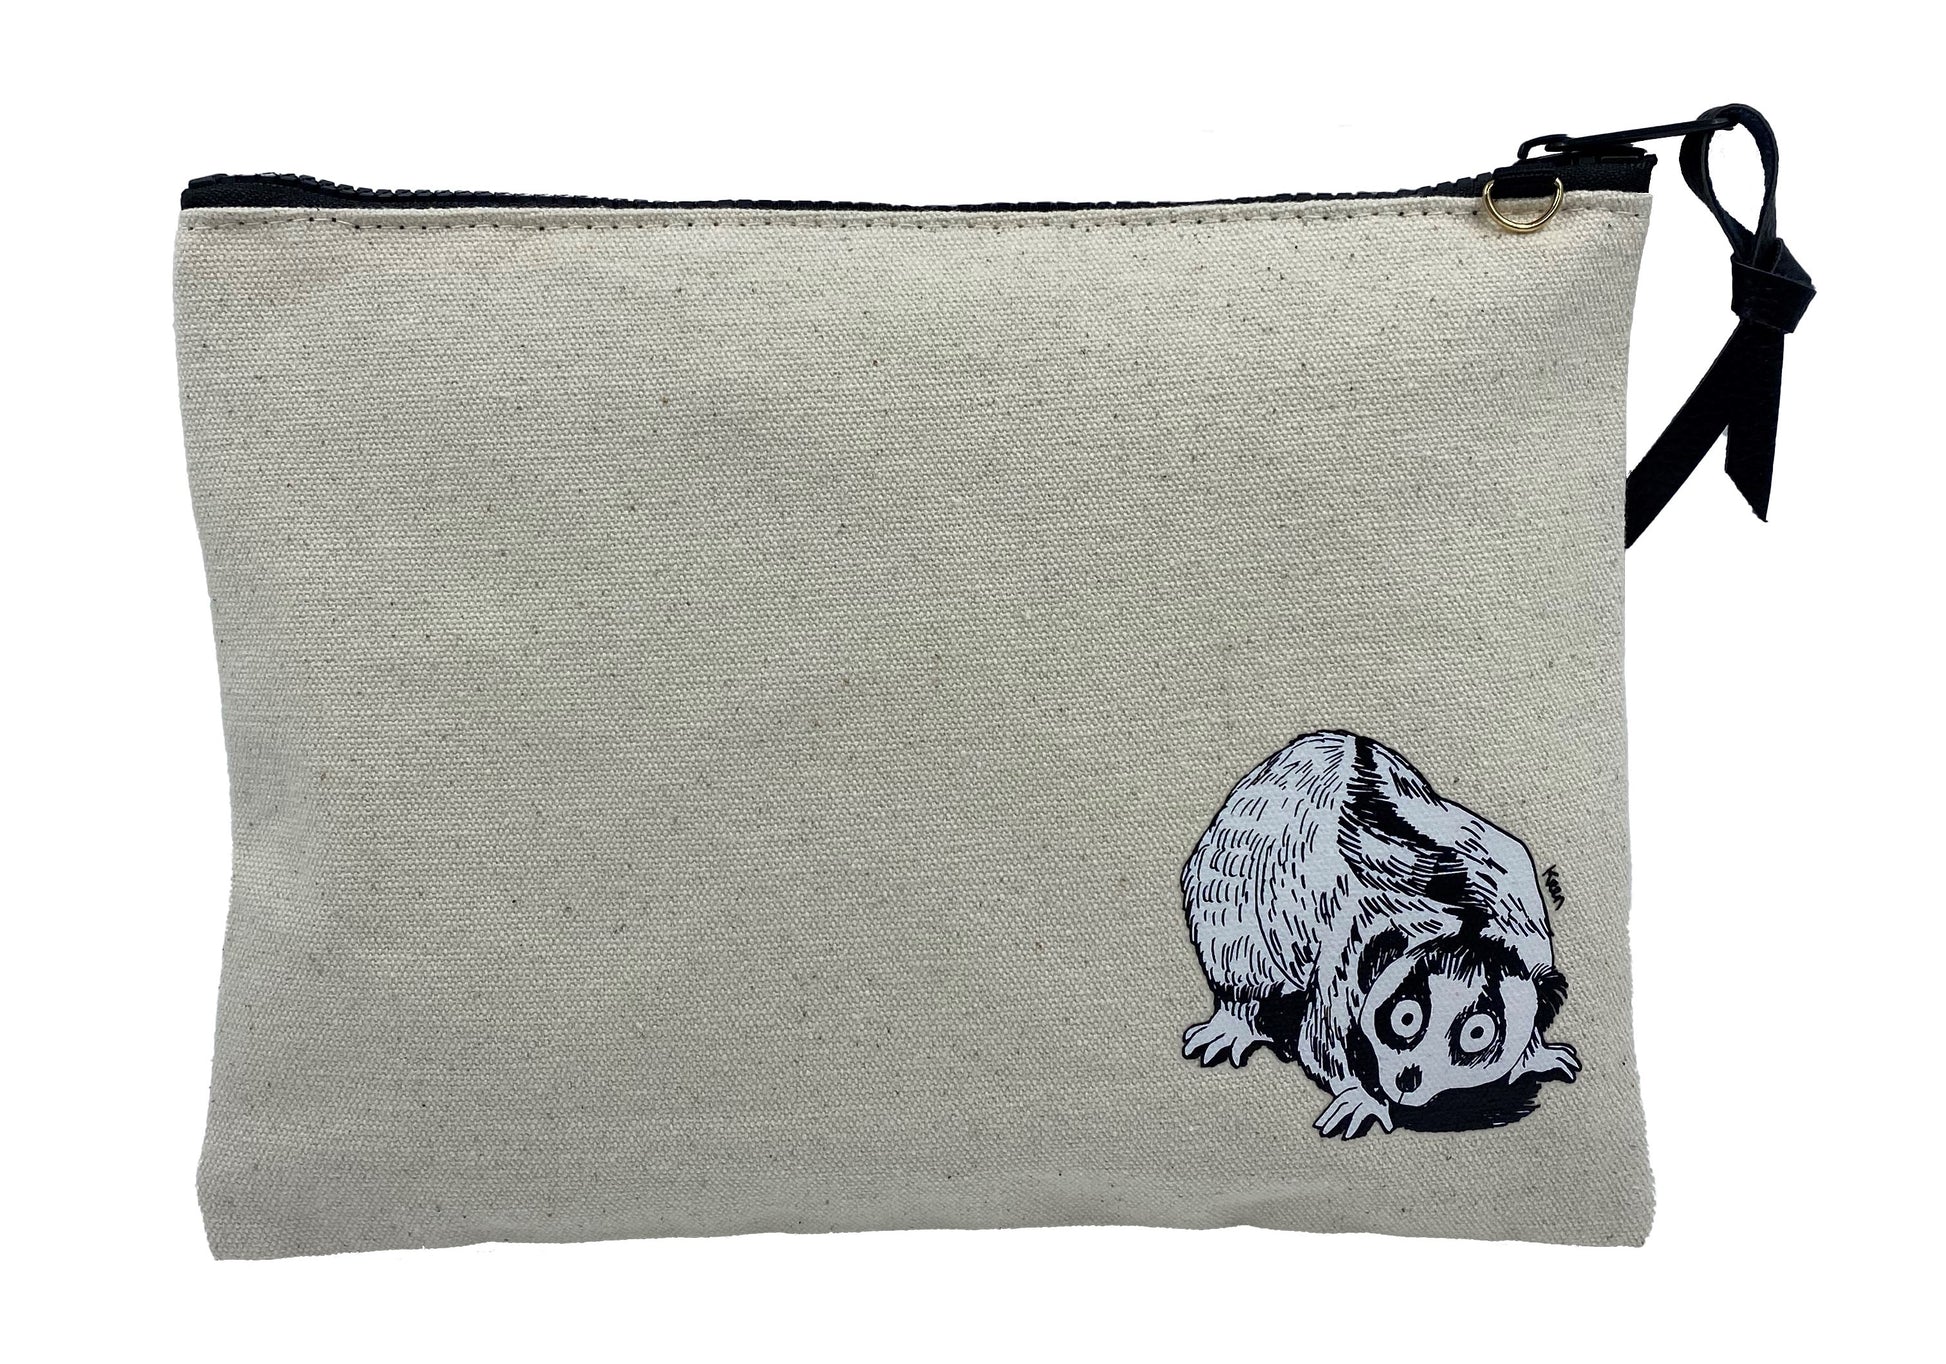 Pouch - Slow Loris Design | The Animal Project